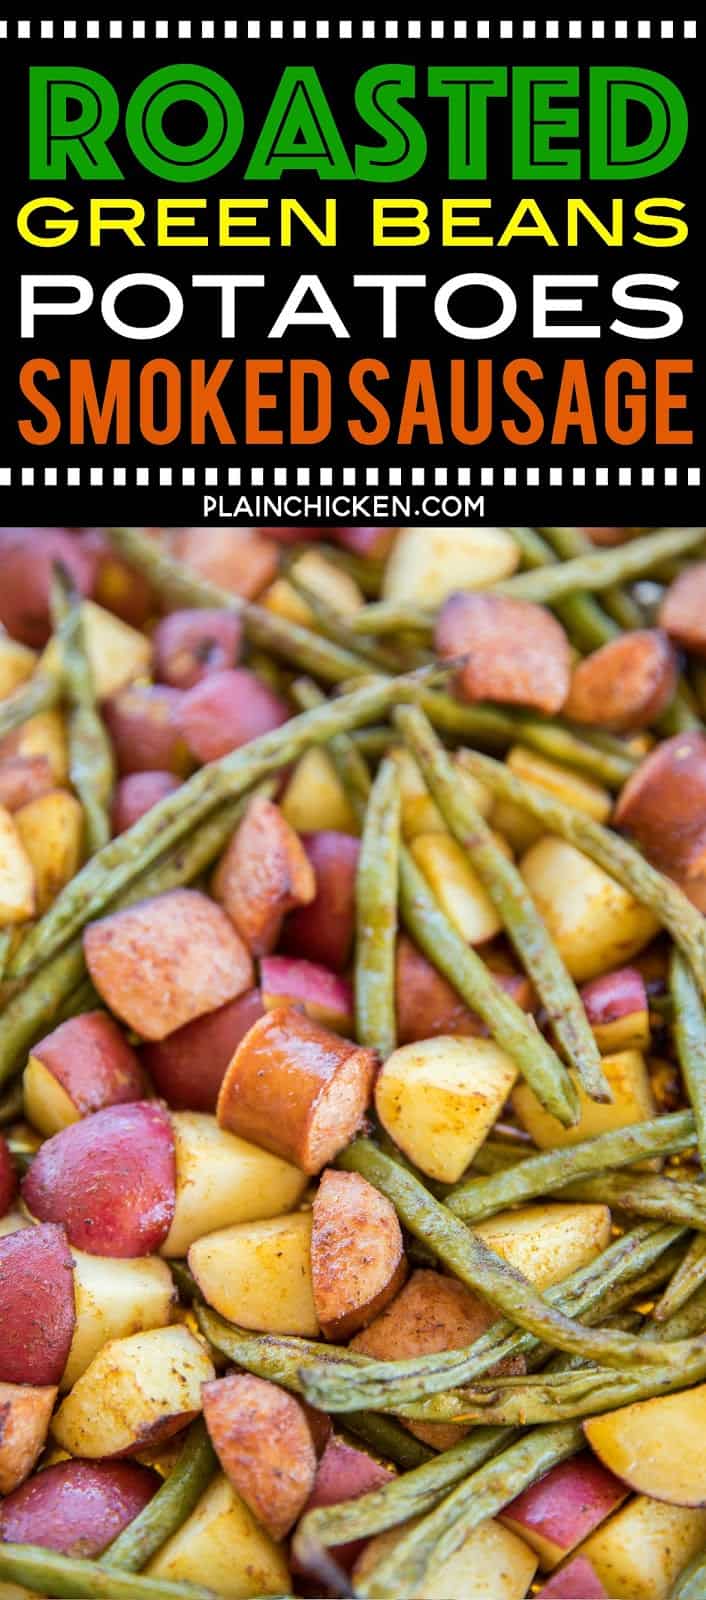 Roasted Green Beans, Potatoes and Smoked Sausage - easy sheet pan meal! Can be a main dish or side dish. SO easy! Only 5 ingredients and ready in 40 minutes!! Red potatoes, green beans, and smoked sausage tossed in olive oil and cajun seasoning. Great weeknight meal! #sheetpanmeal #sidedish #veggies